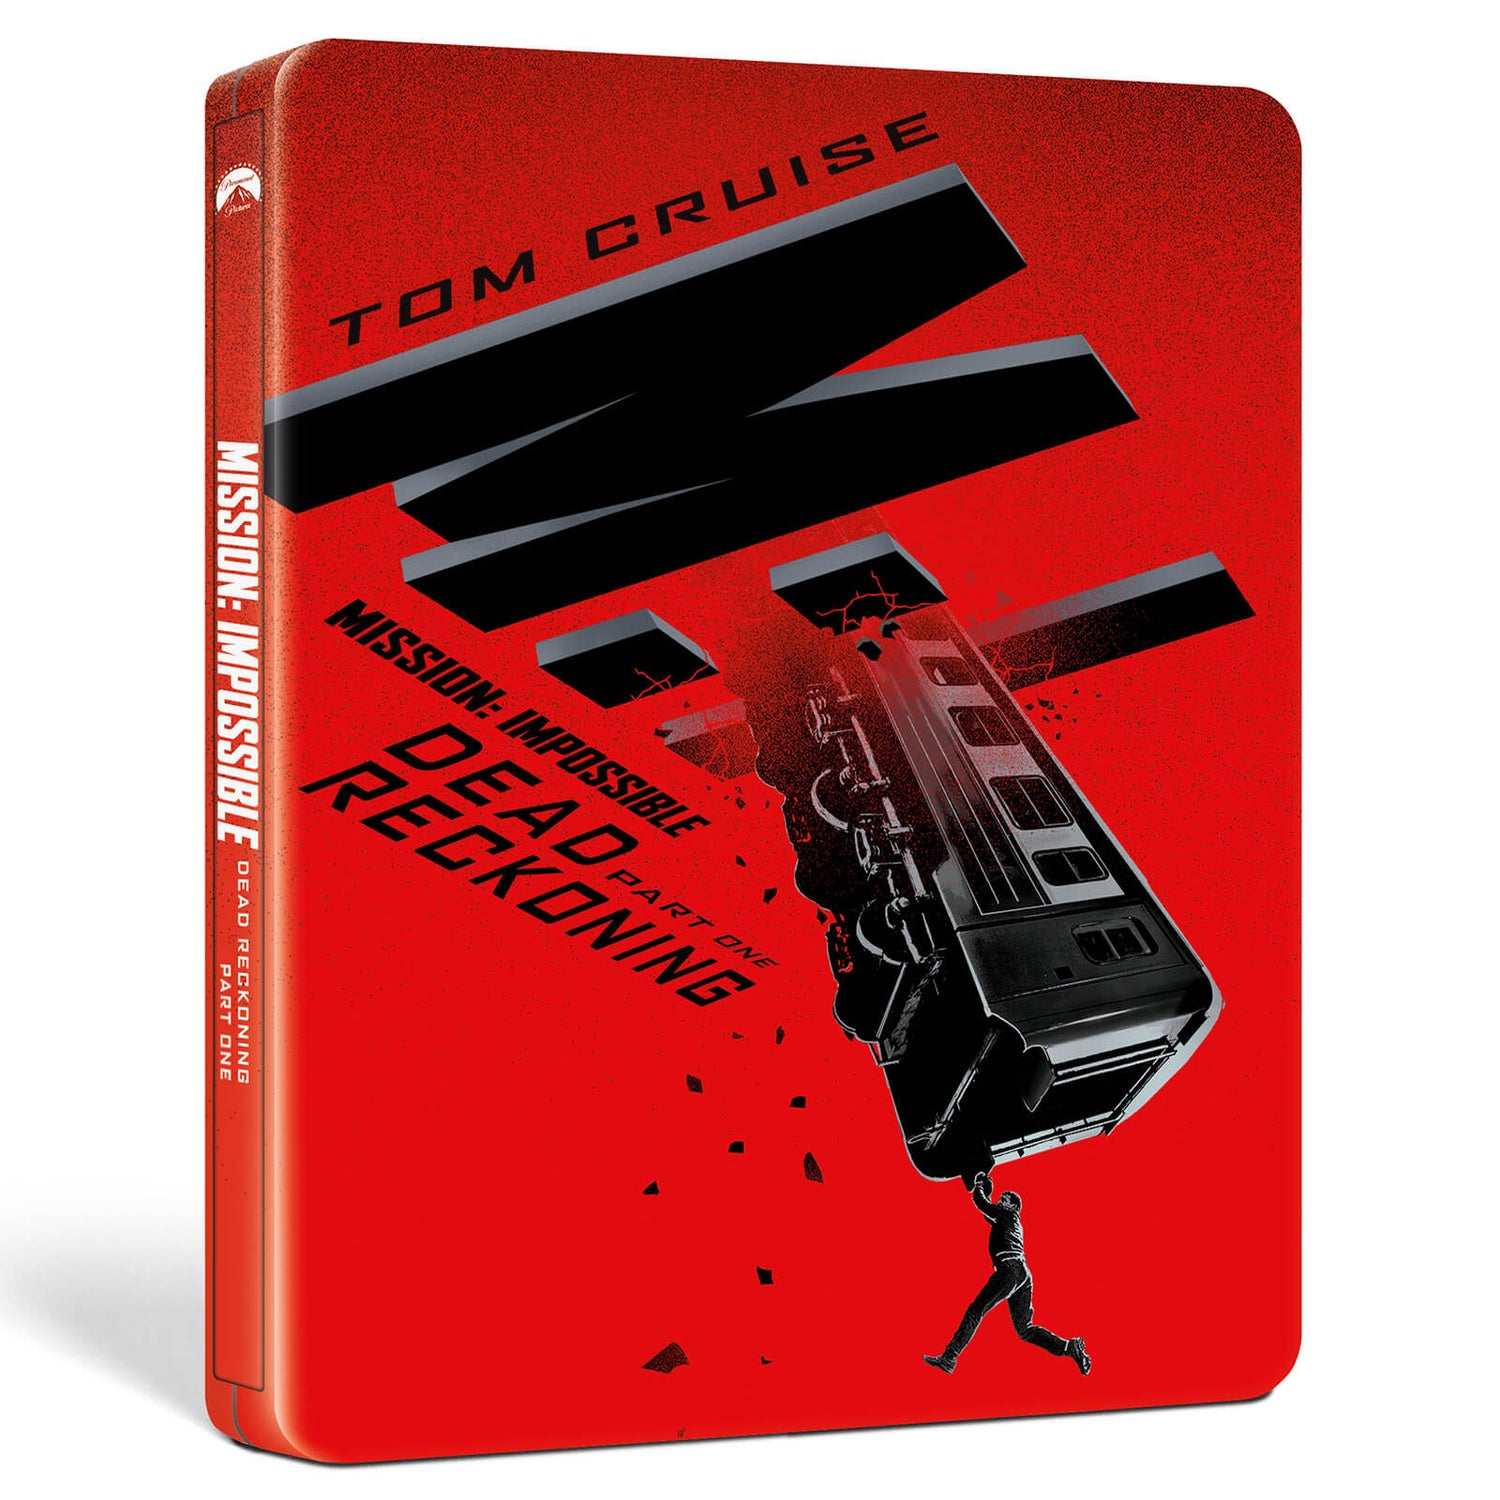 Mission: Impossible Dead Reckoning Part 1 Red Edition 4K Ultra HD Steelbook (includes Blu-ray)